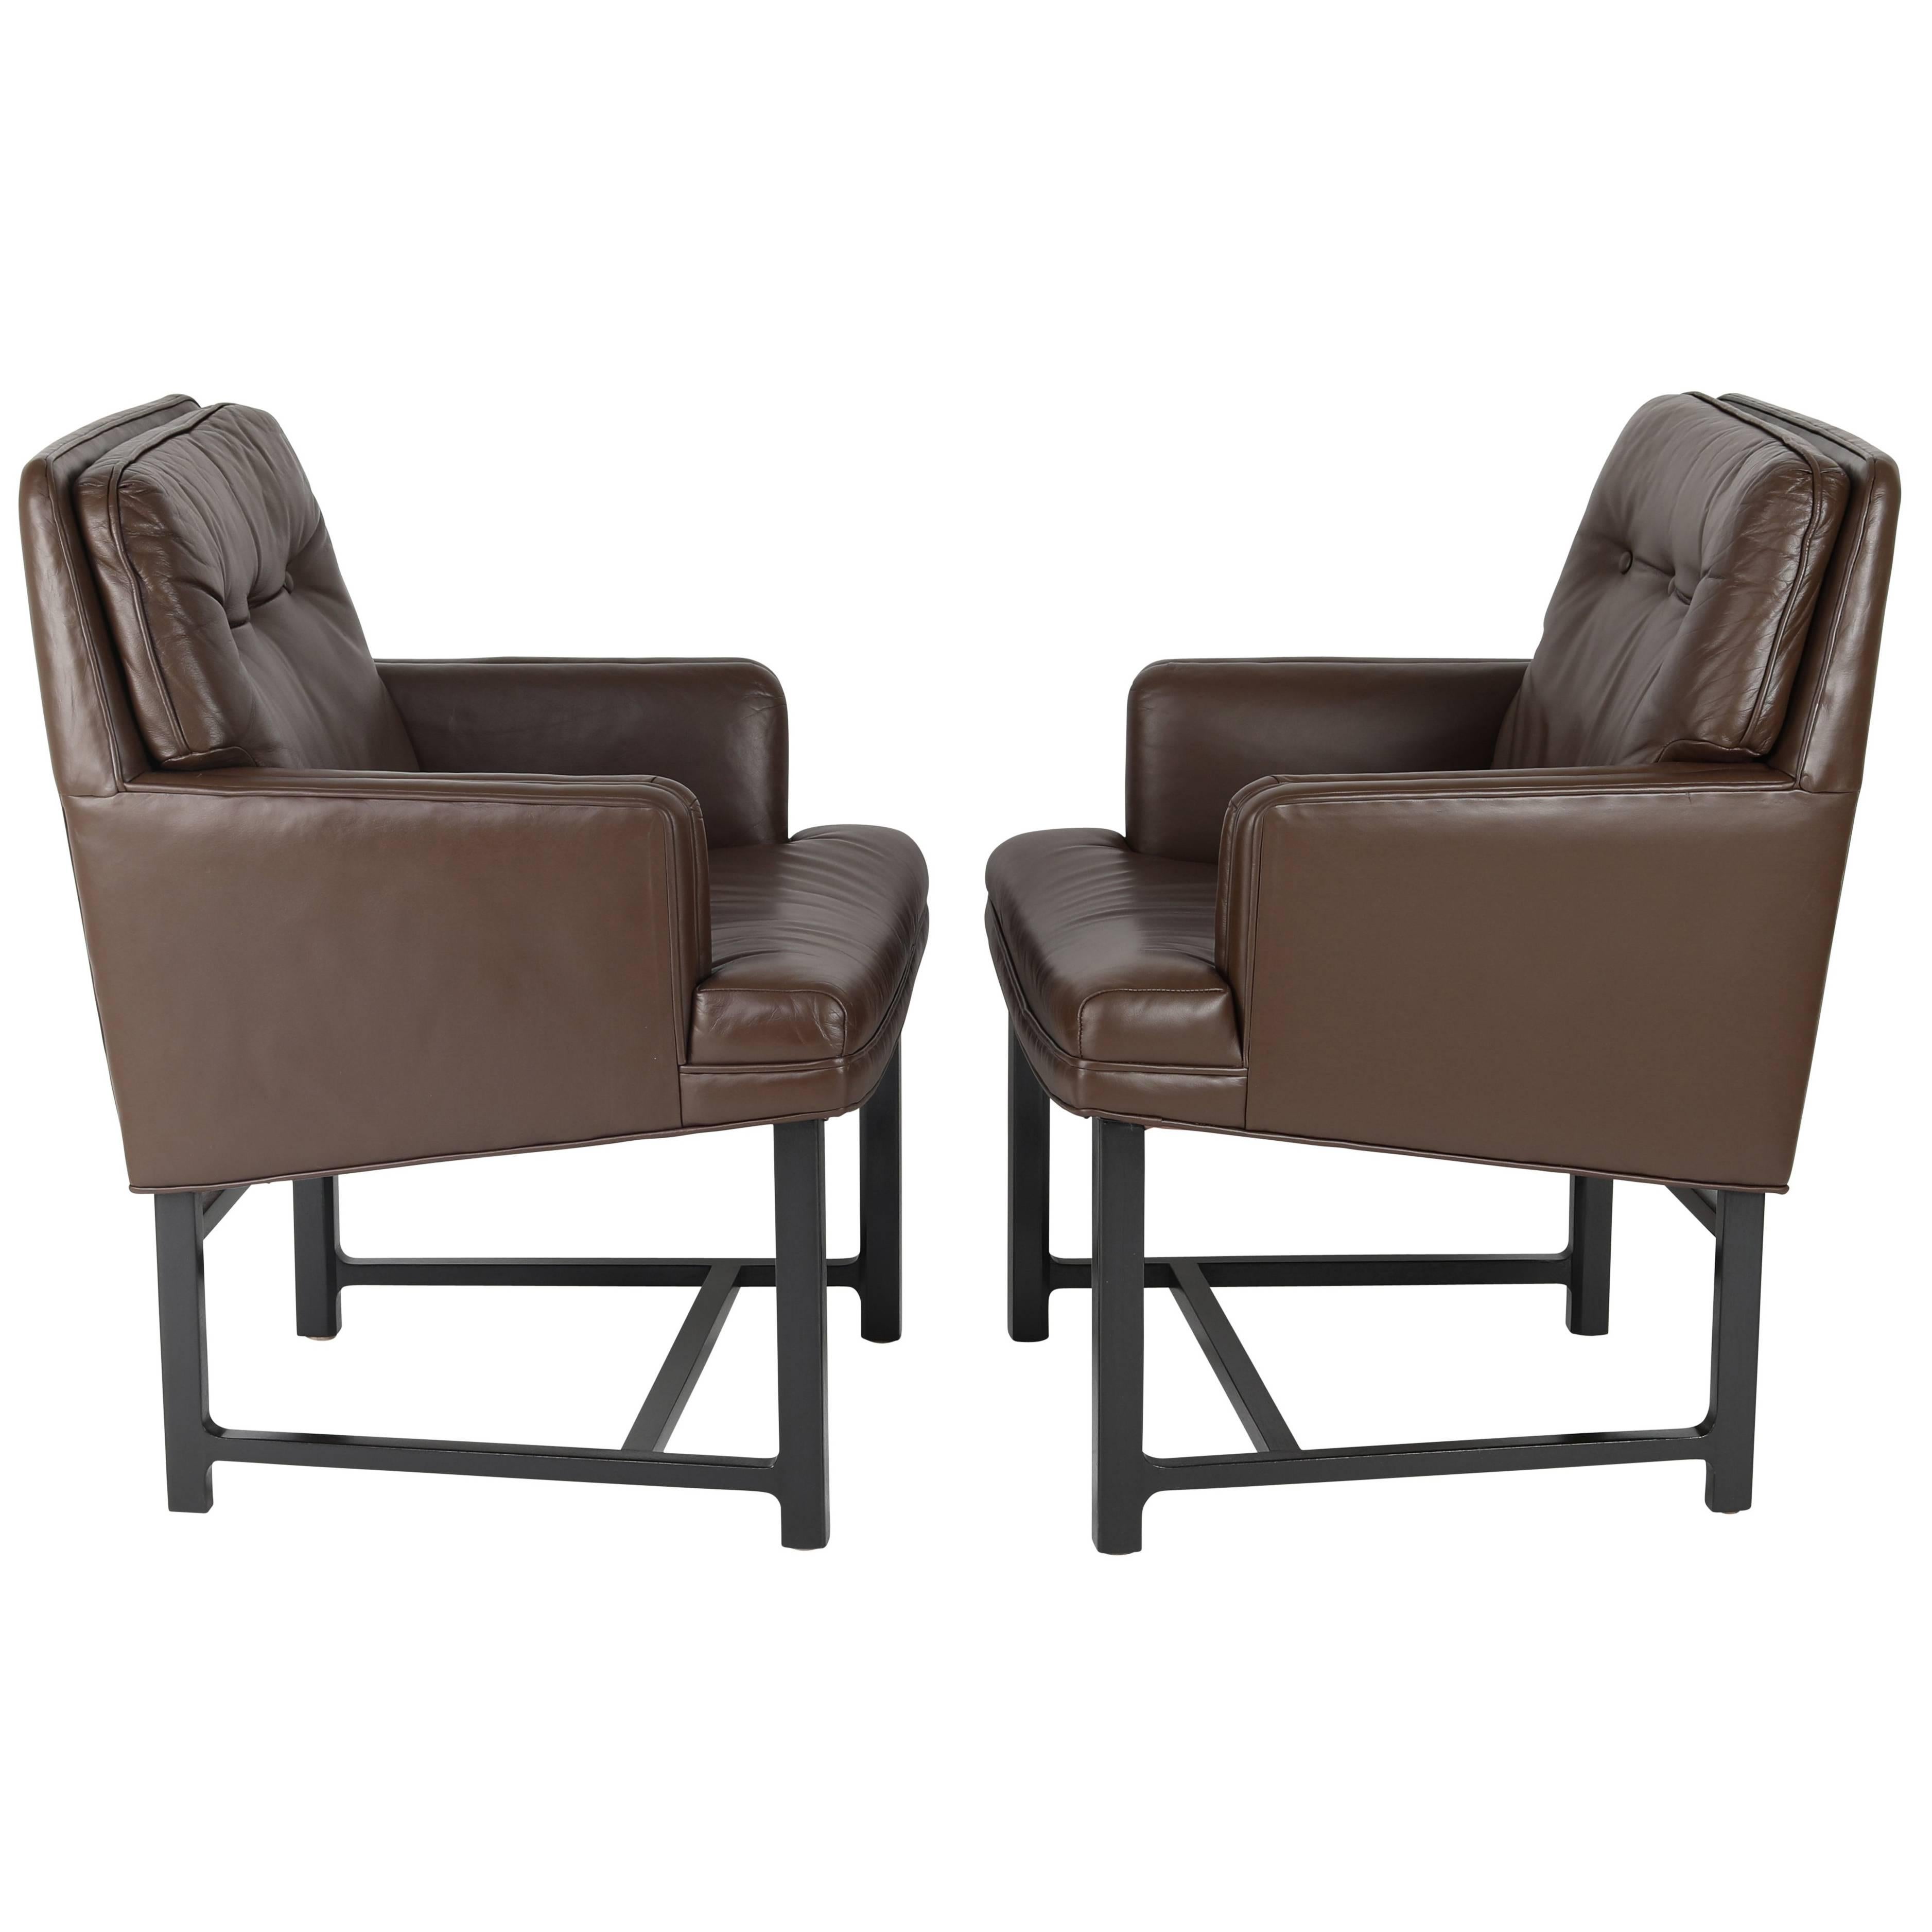 Pair of Edward Wormley for Dunbar Armchairs in Leather and Mahogany, circa 1960s For Sale